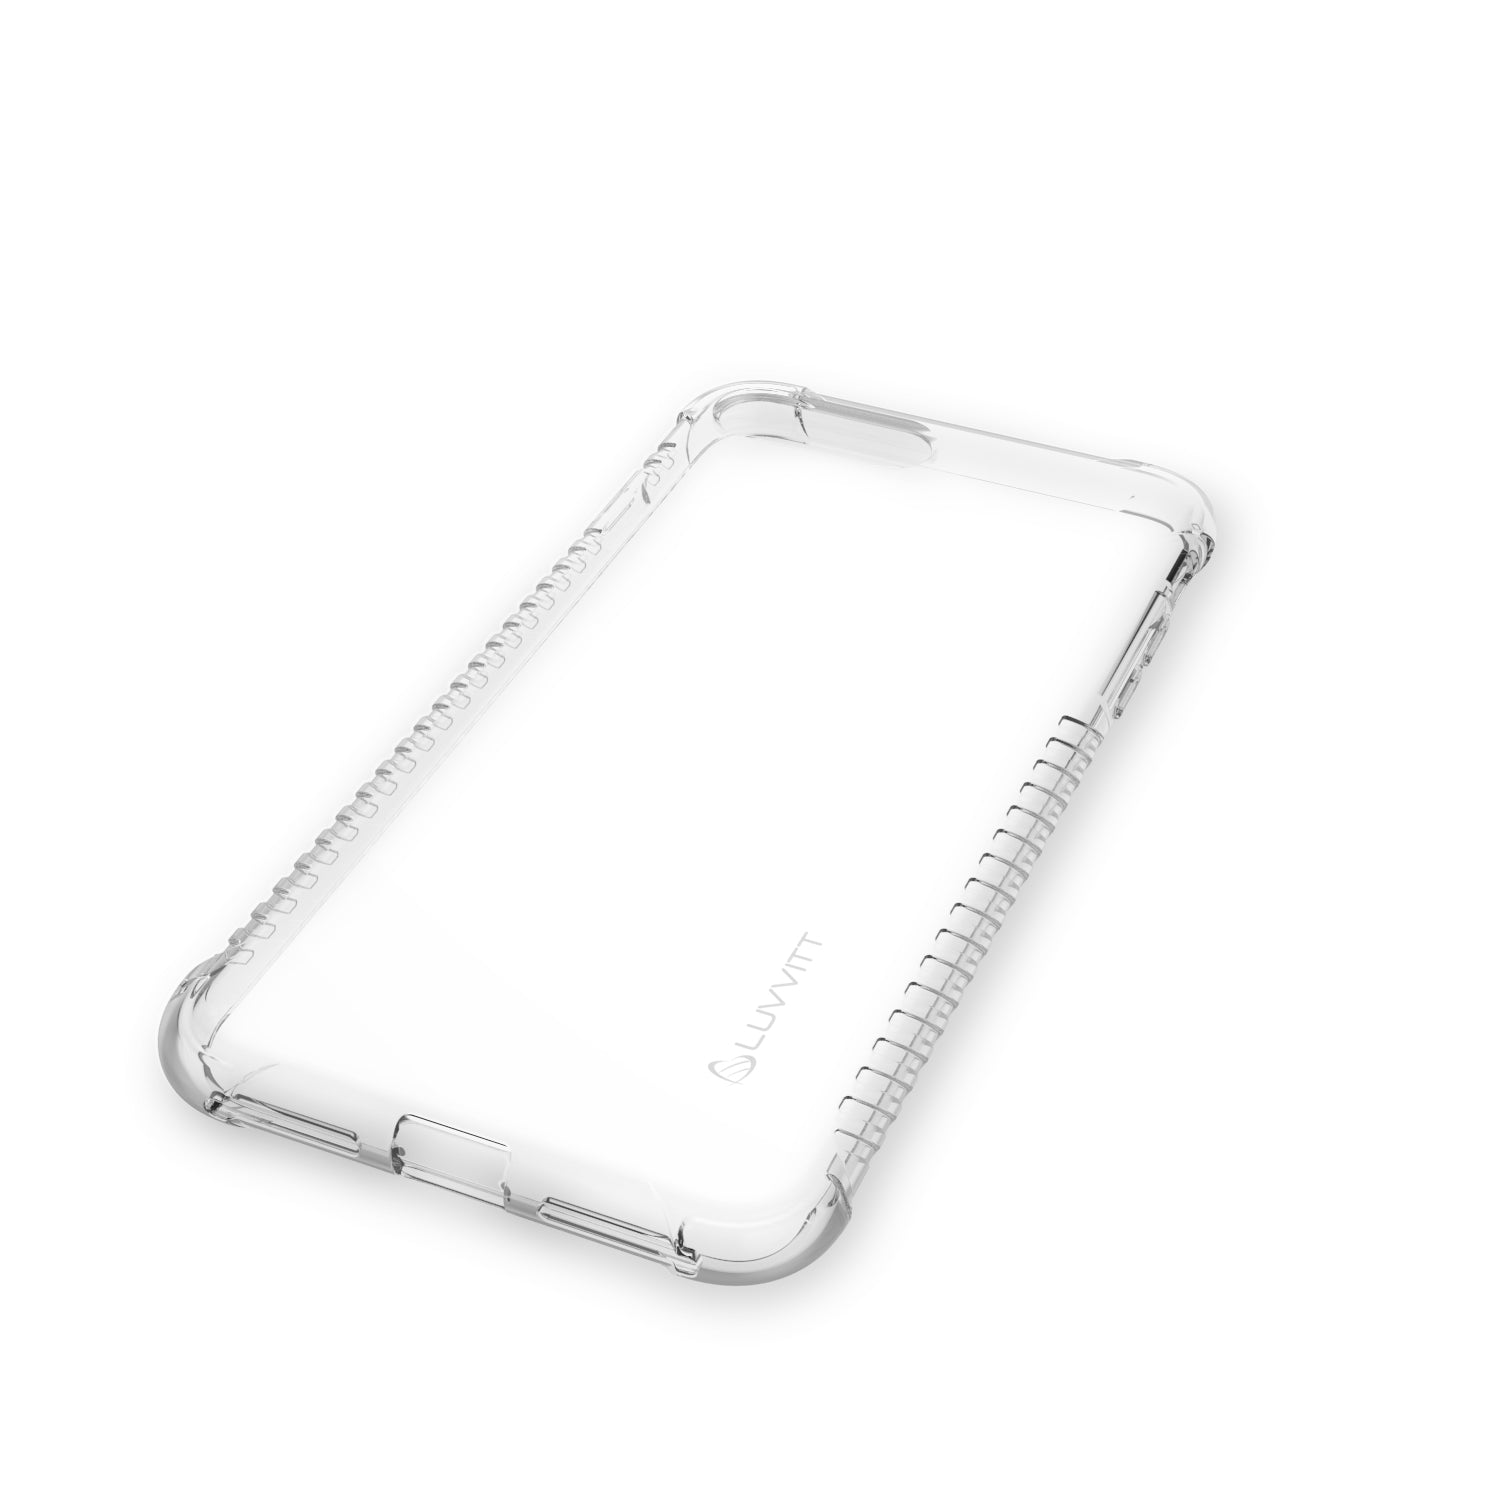 Luvvitt Clear Grip Flexible TPU Case for iPhone 7 Plus and 8 Plus - Clear